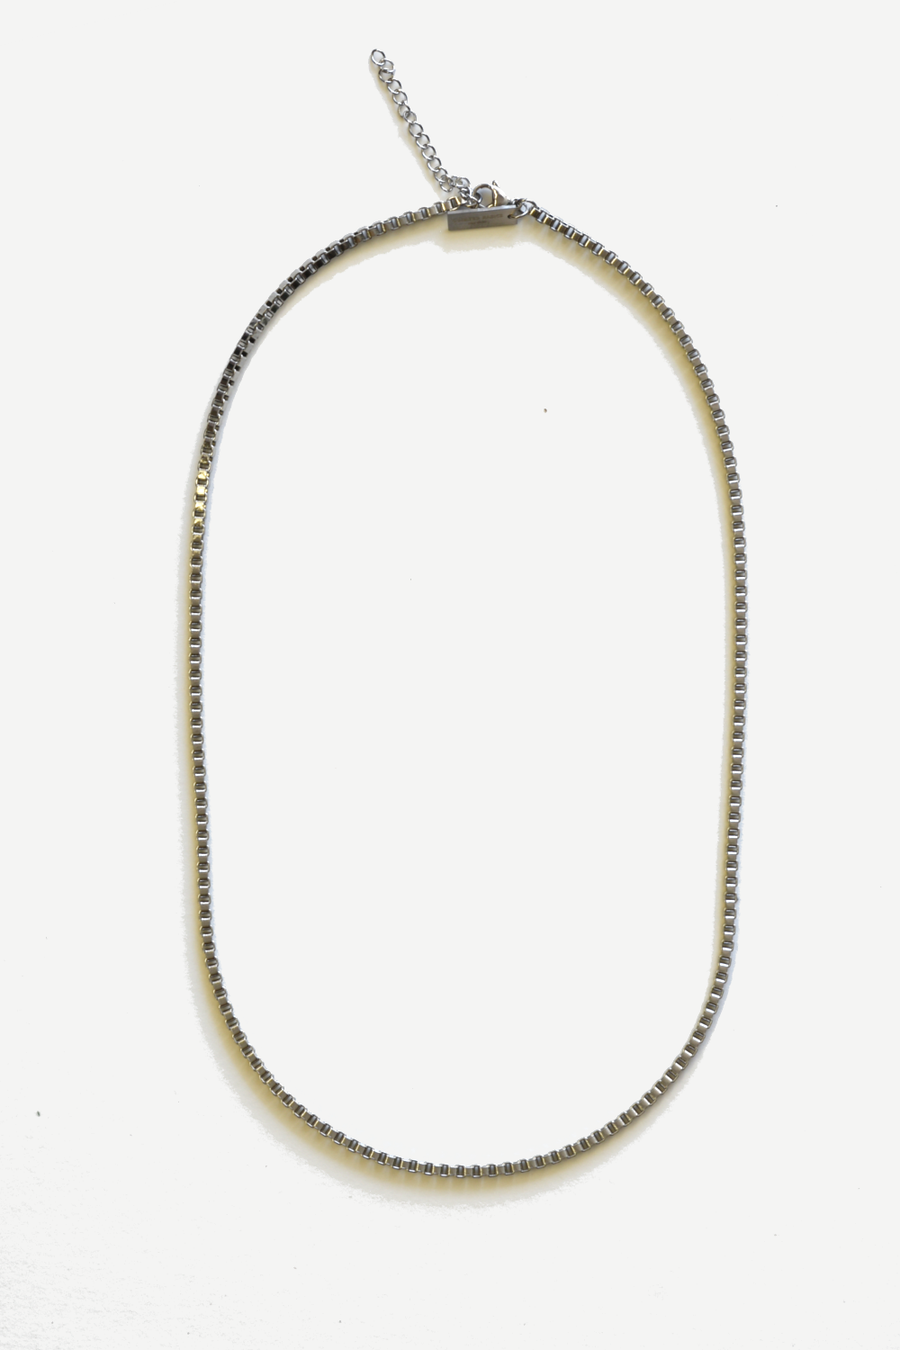 2mm Boxed Chain Necklace: Silver Stainless Steel